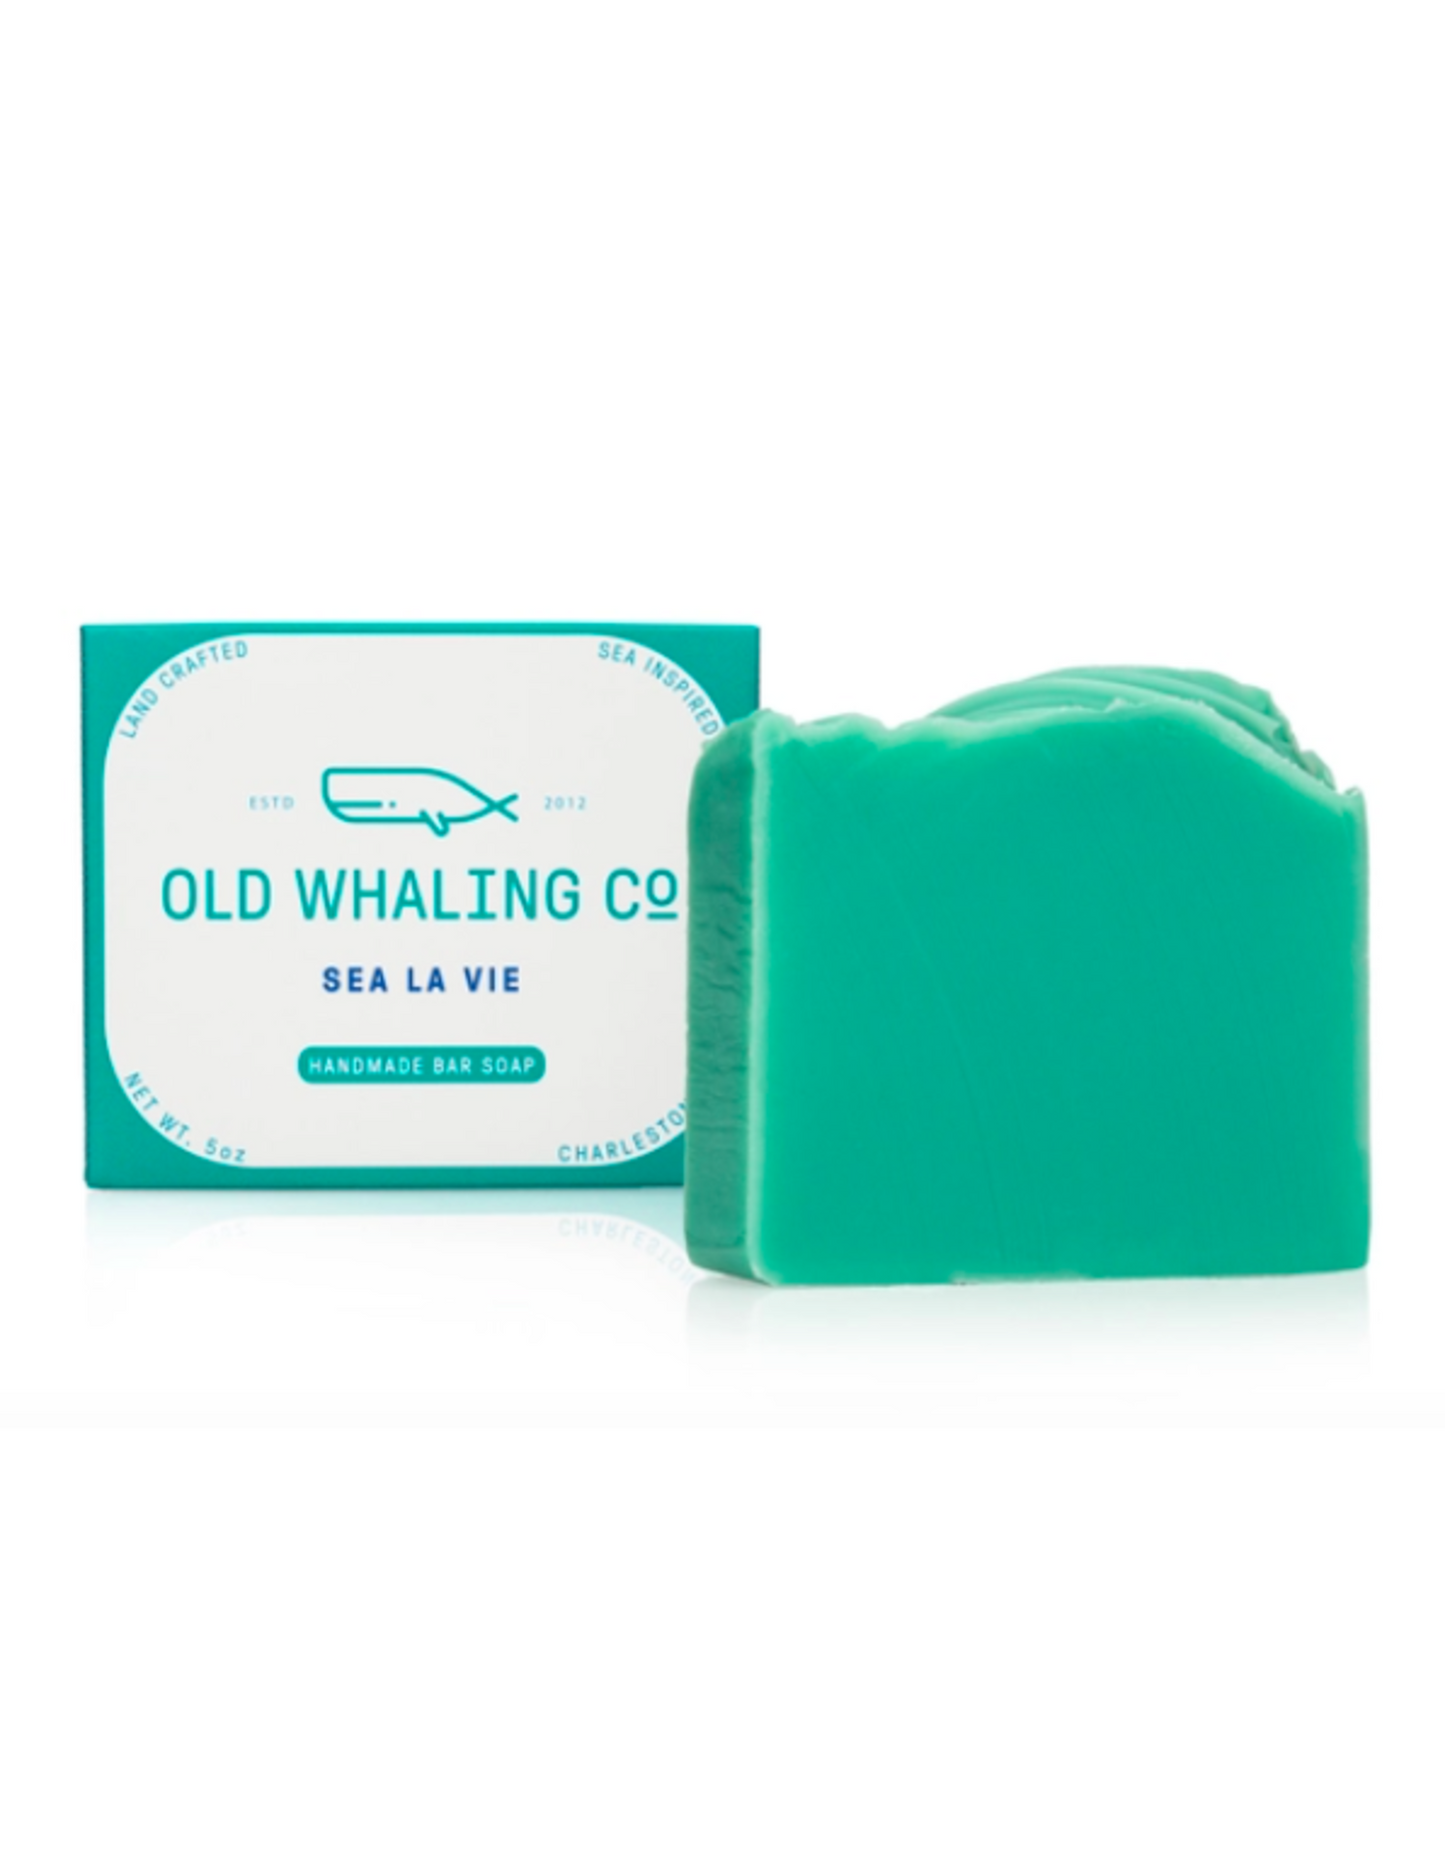 Old Whaling Co. Soap Bar